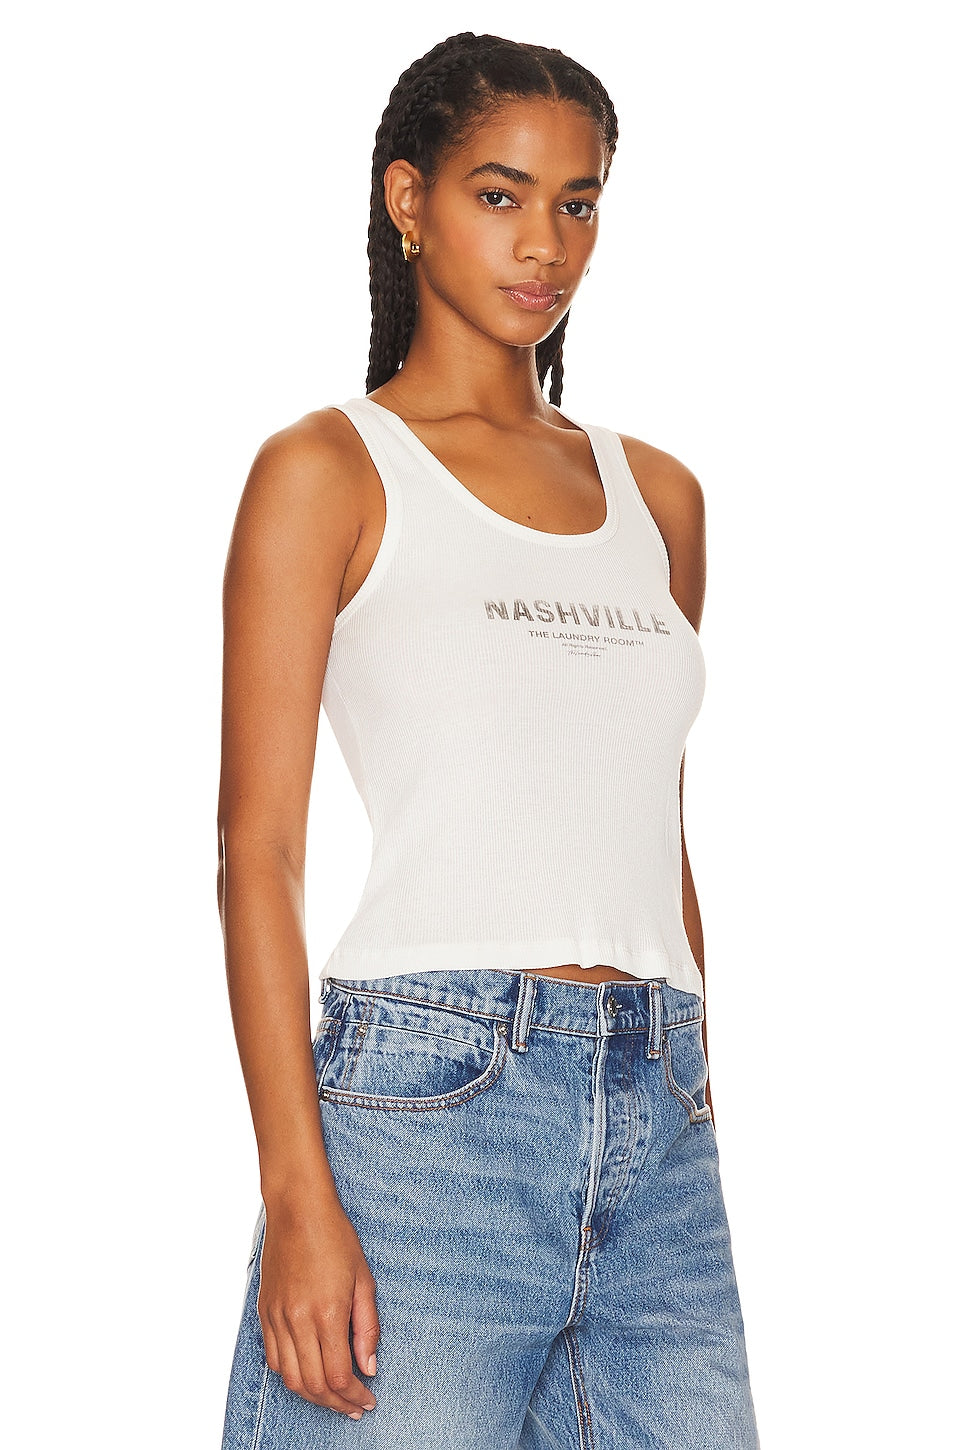 The Laundry Room Nashville Passport Stamp Rib Tank in White Size Small